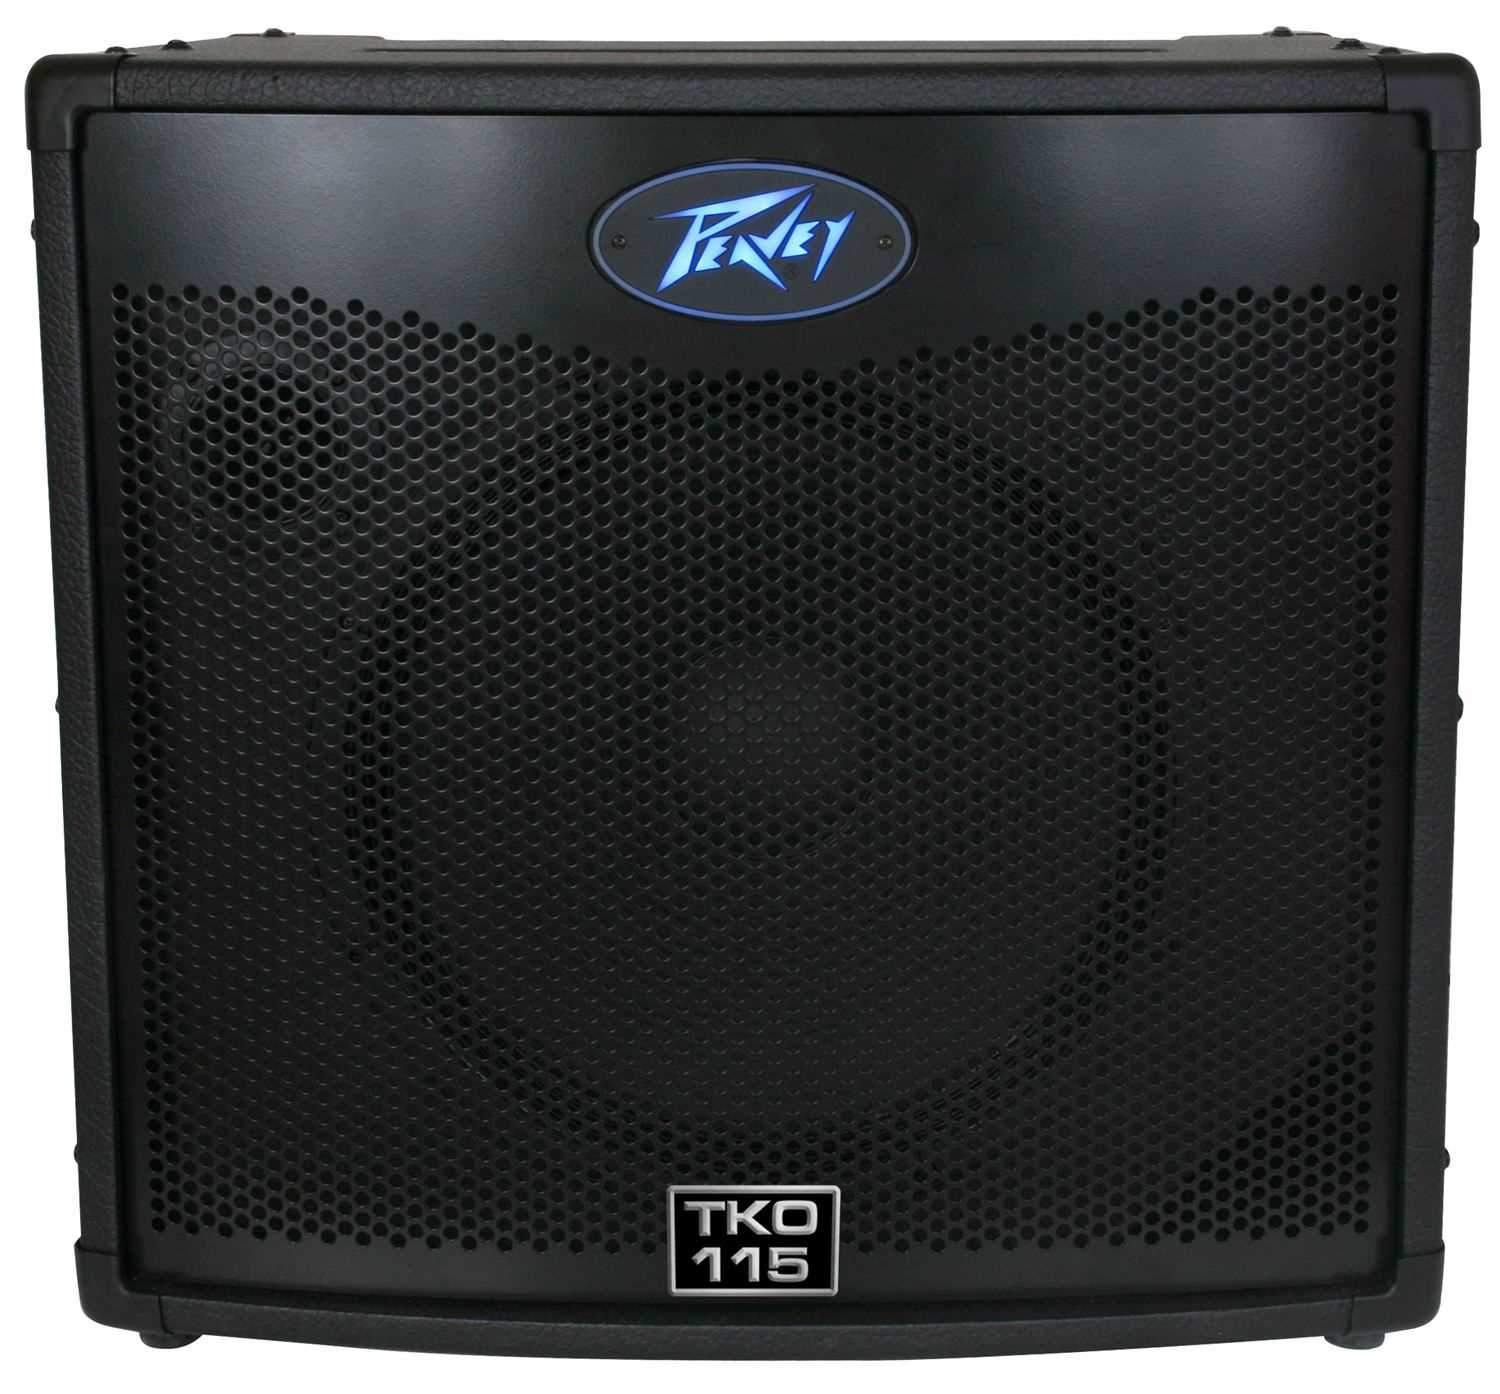 Peavey Tour TKO 115 1 x 15 Bass Combo Amp - ProSound and Stage Lighting